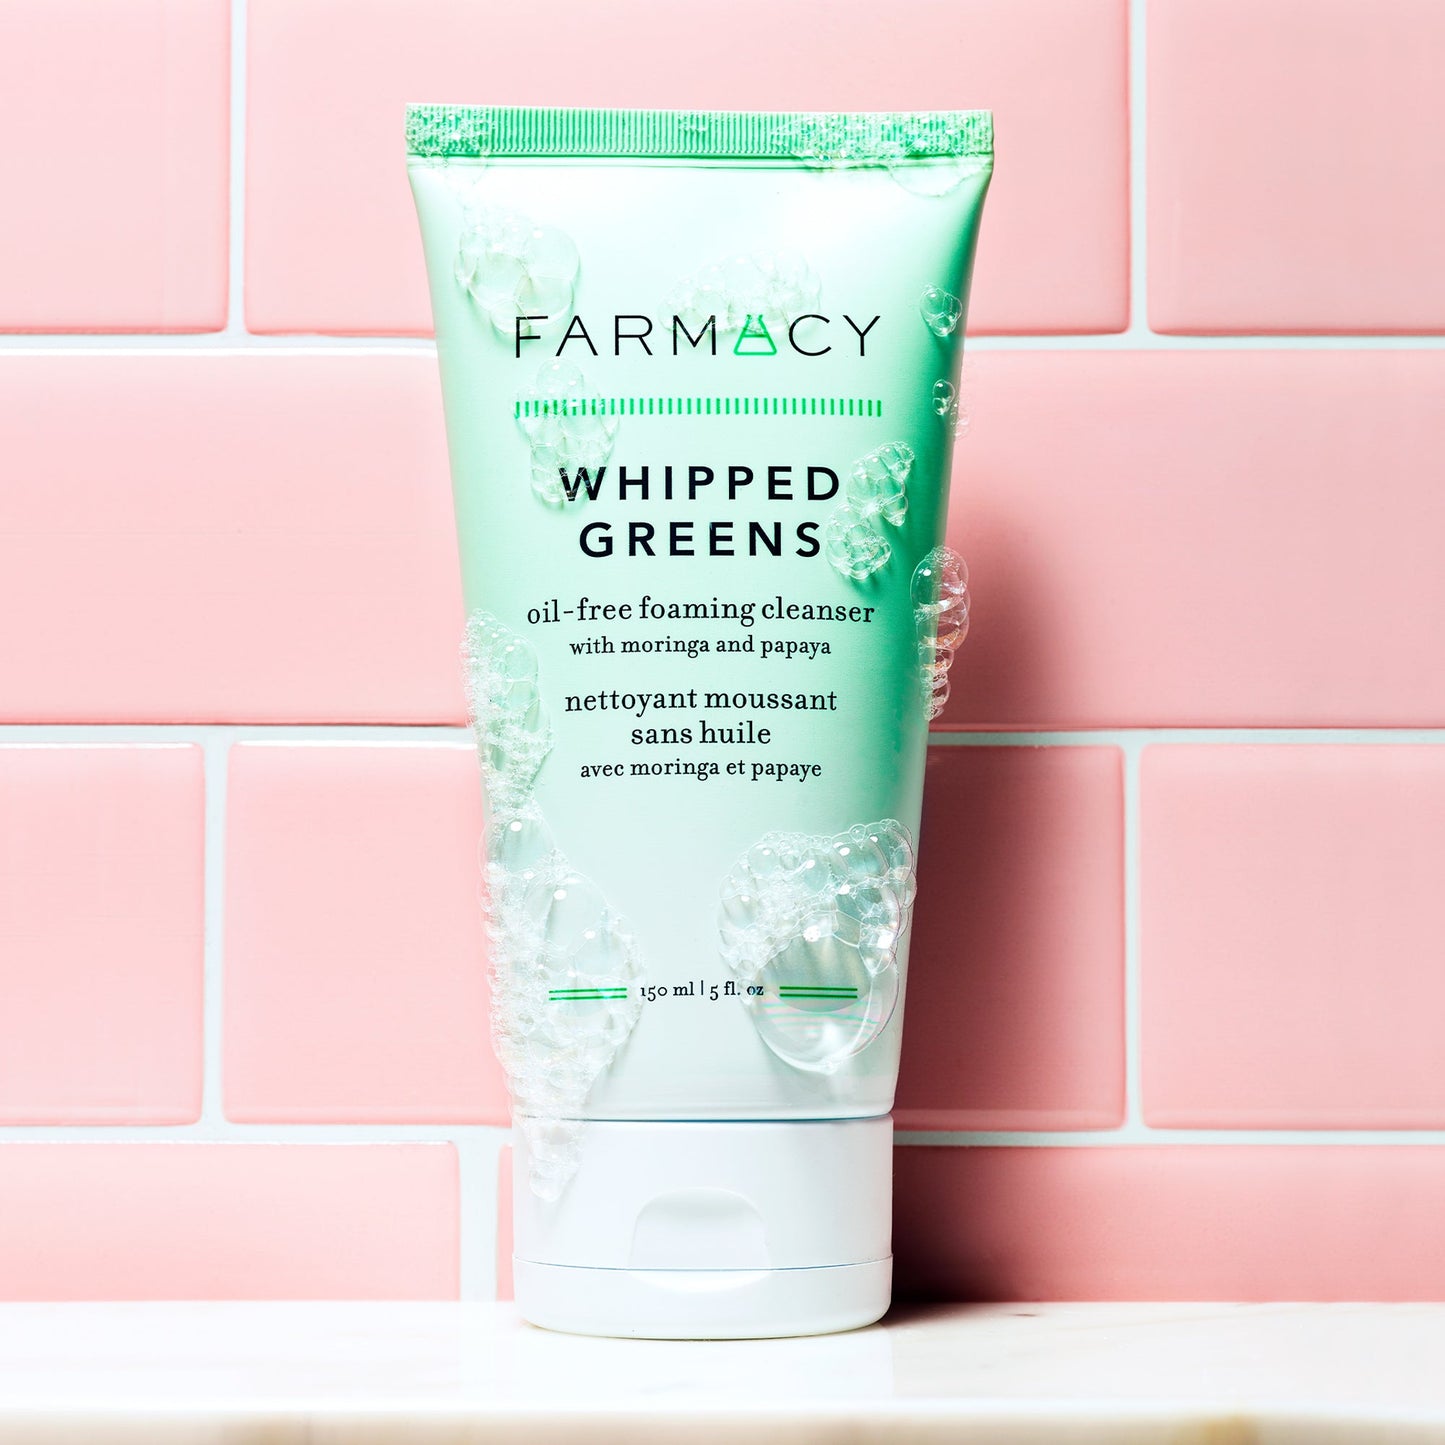 Farmacy Whipped Greens Oil-Free Foaming Cleanser 150ml